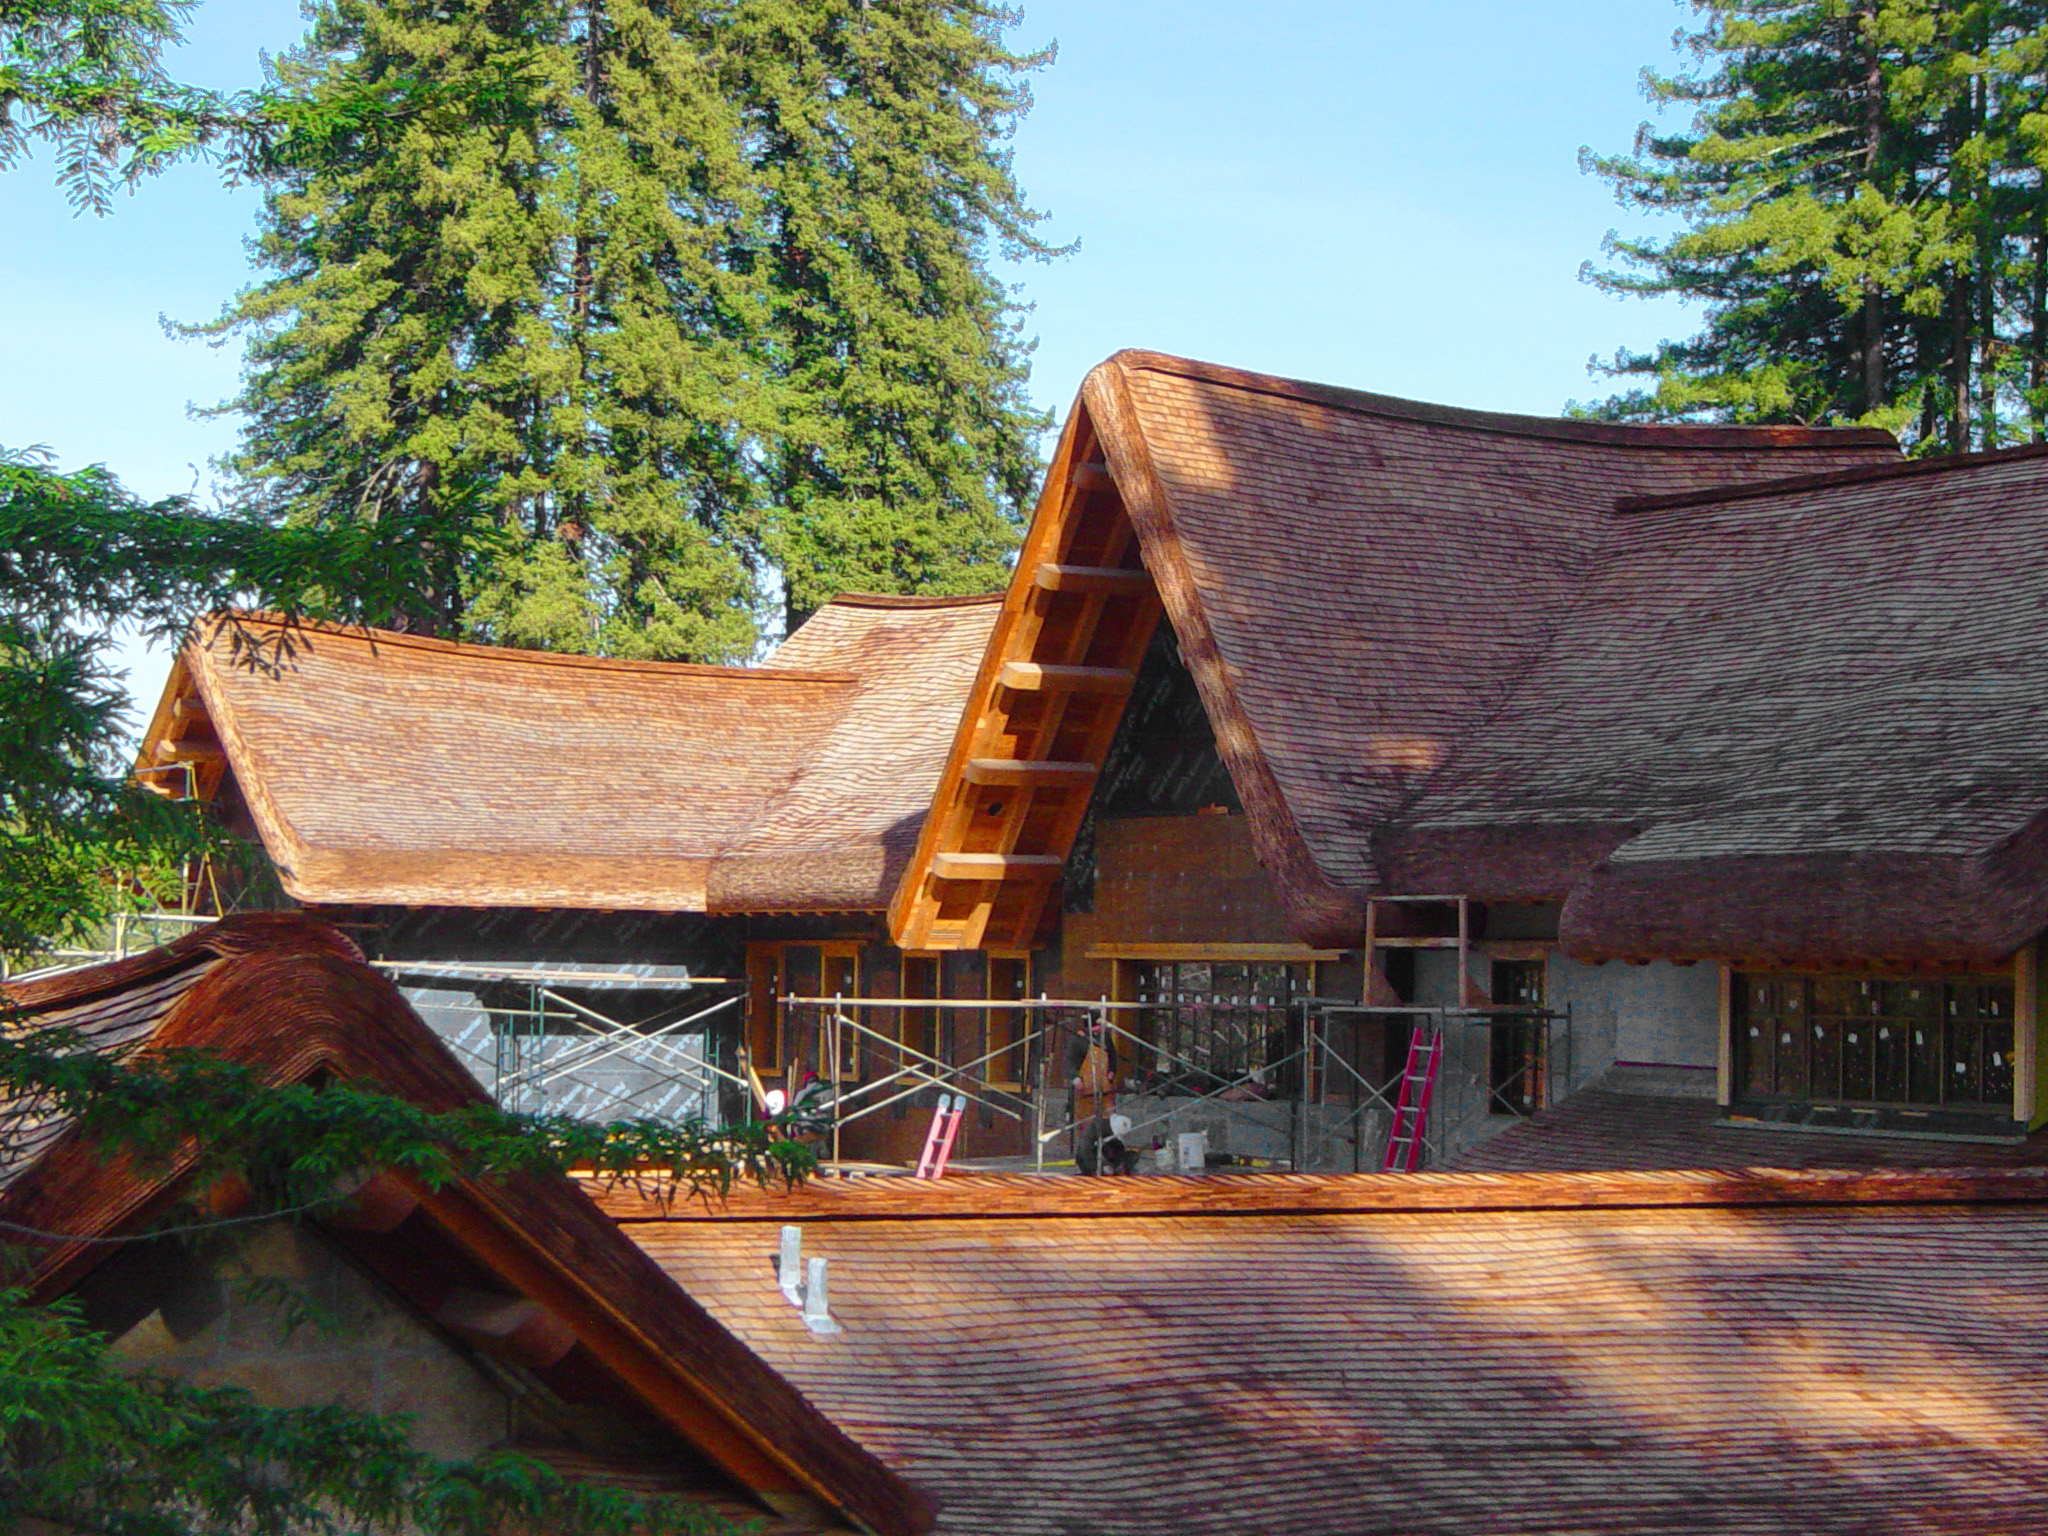 California-Zook-Style-Home-with-Built-up-Eaves-and-Curved-Ridge-(3).JPG